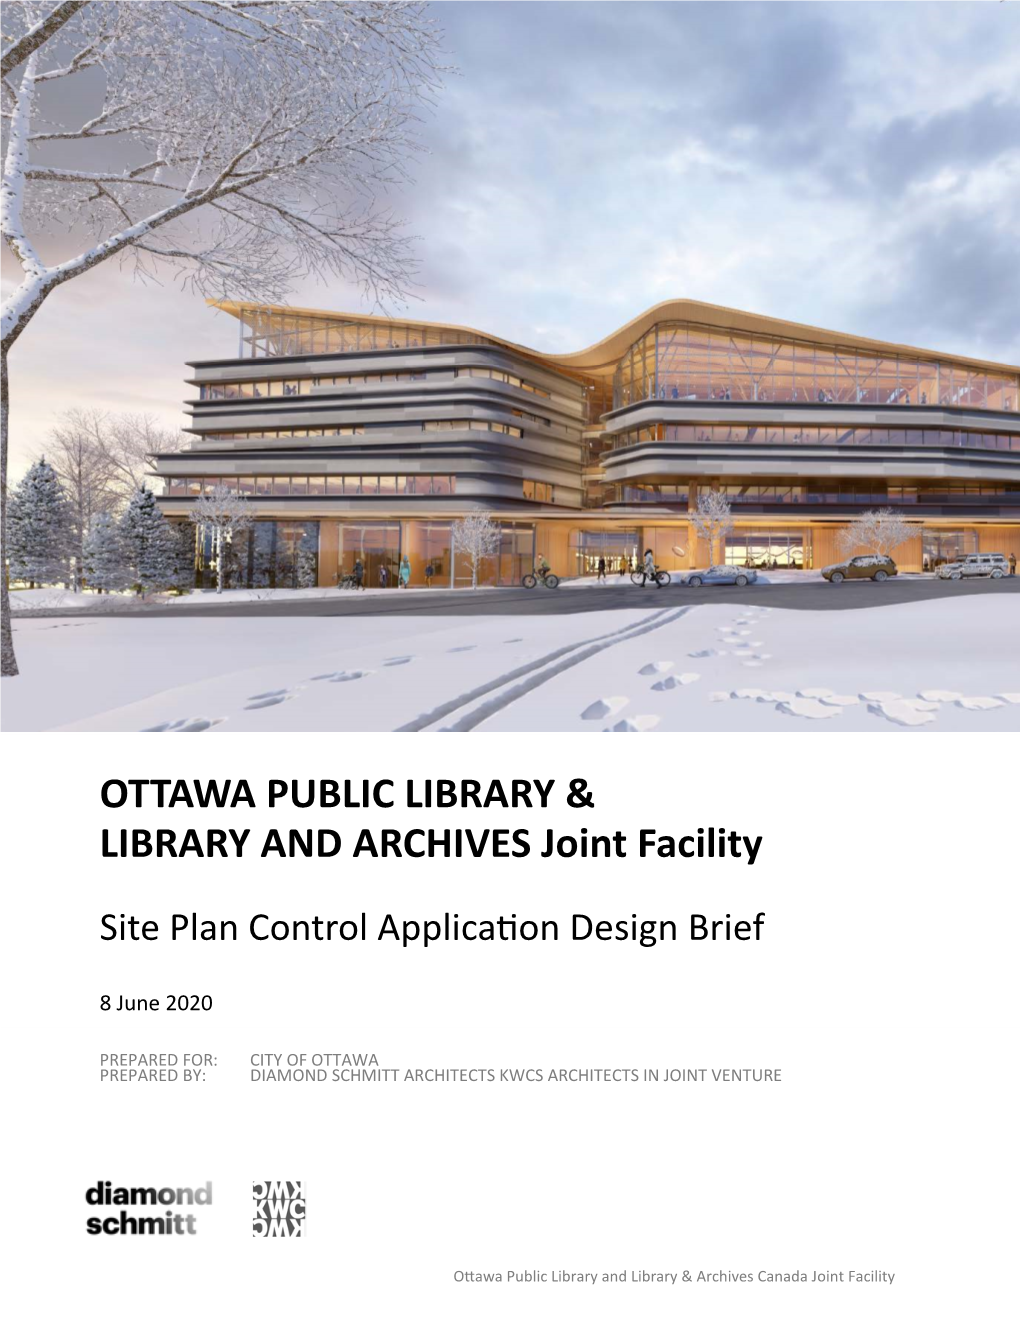 OTTAWA PUBLIC LIBRARY & LIBRARY and ARCHIVES Joint